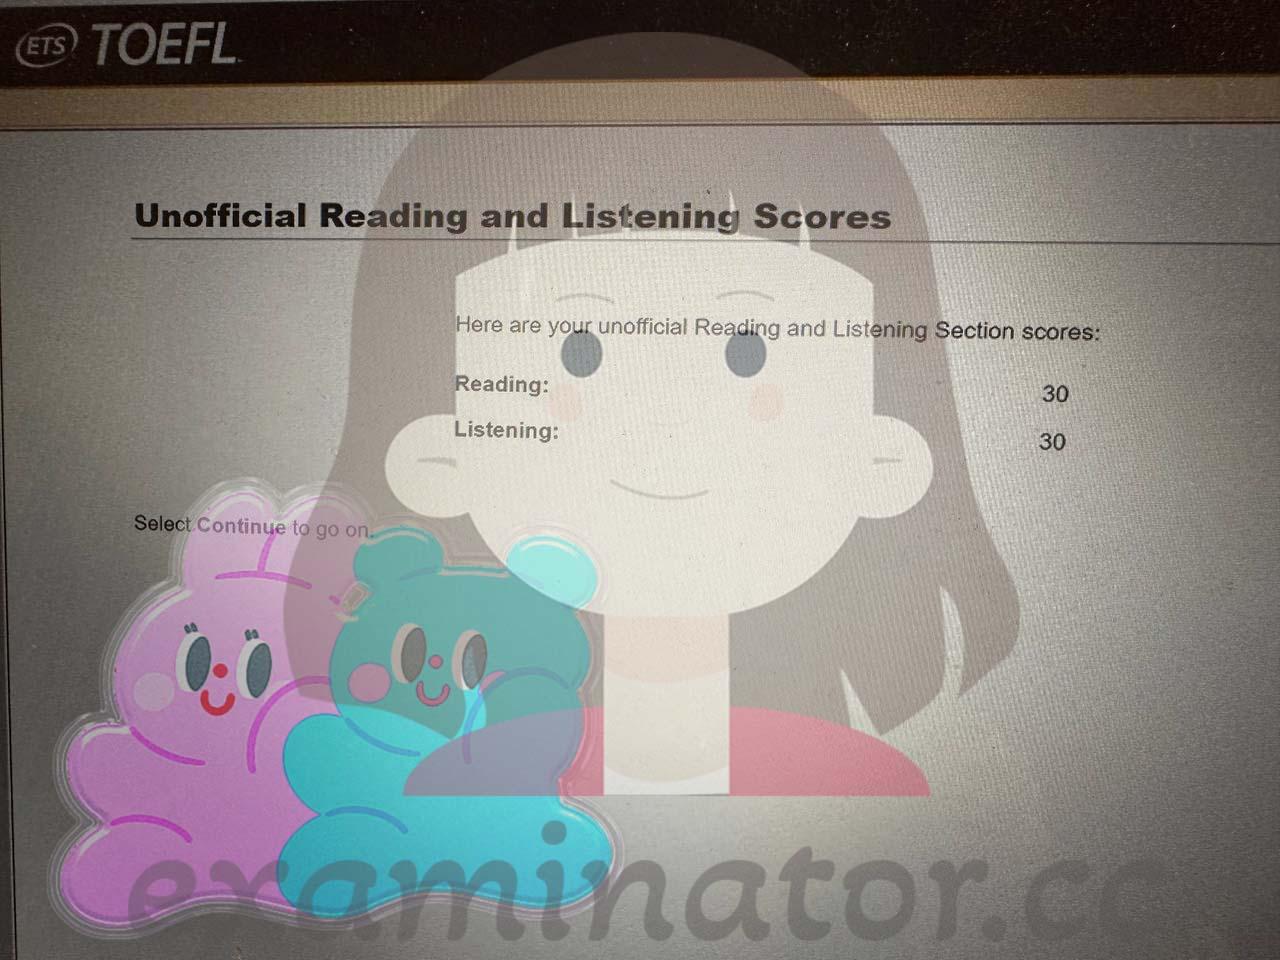 score image for TOEFL Cheating success story #584